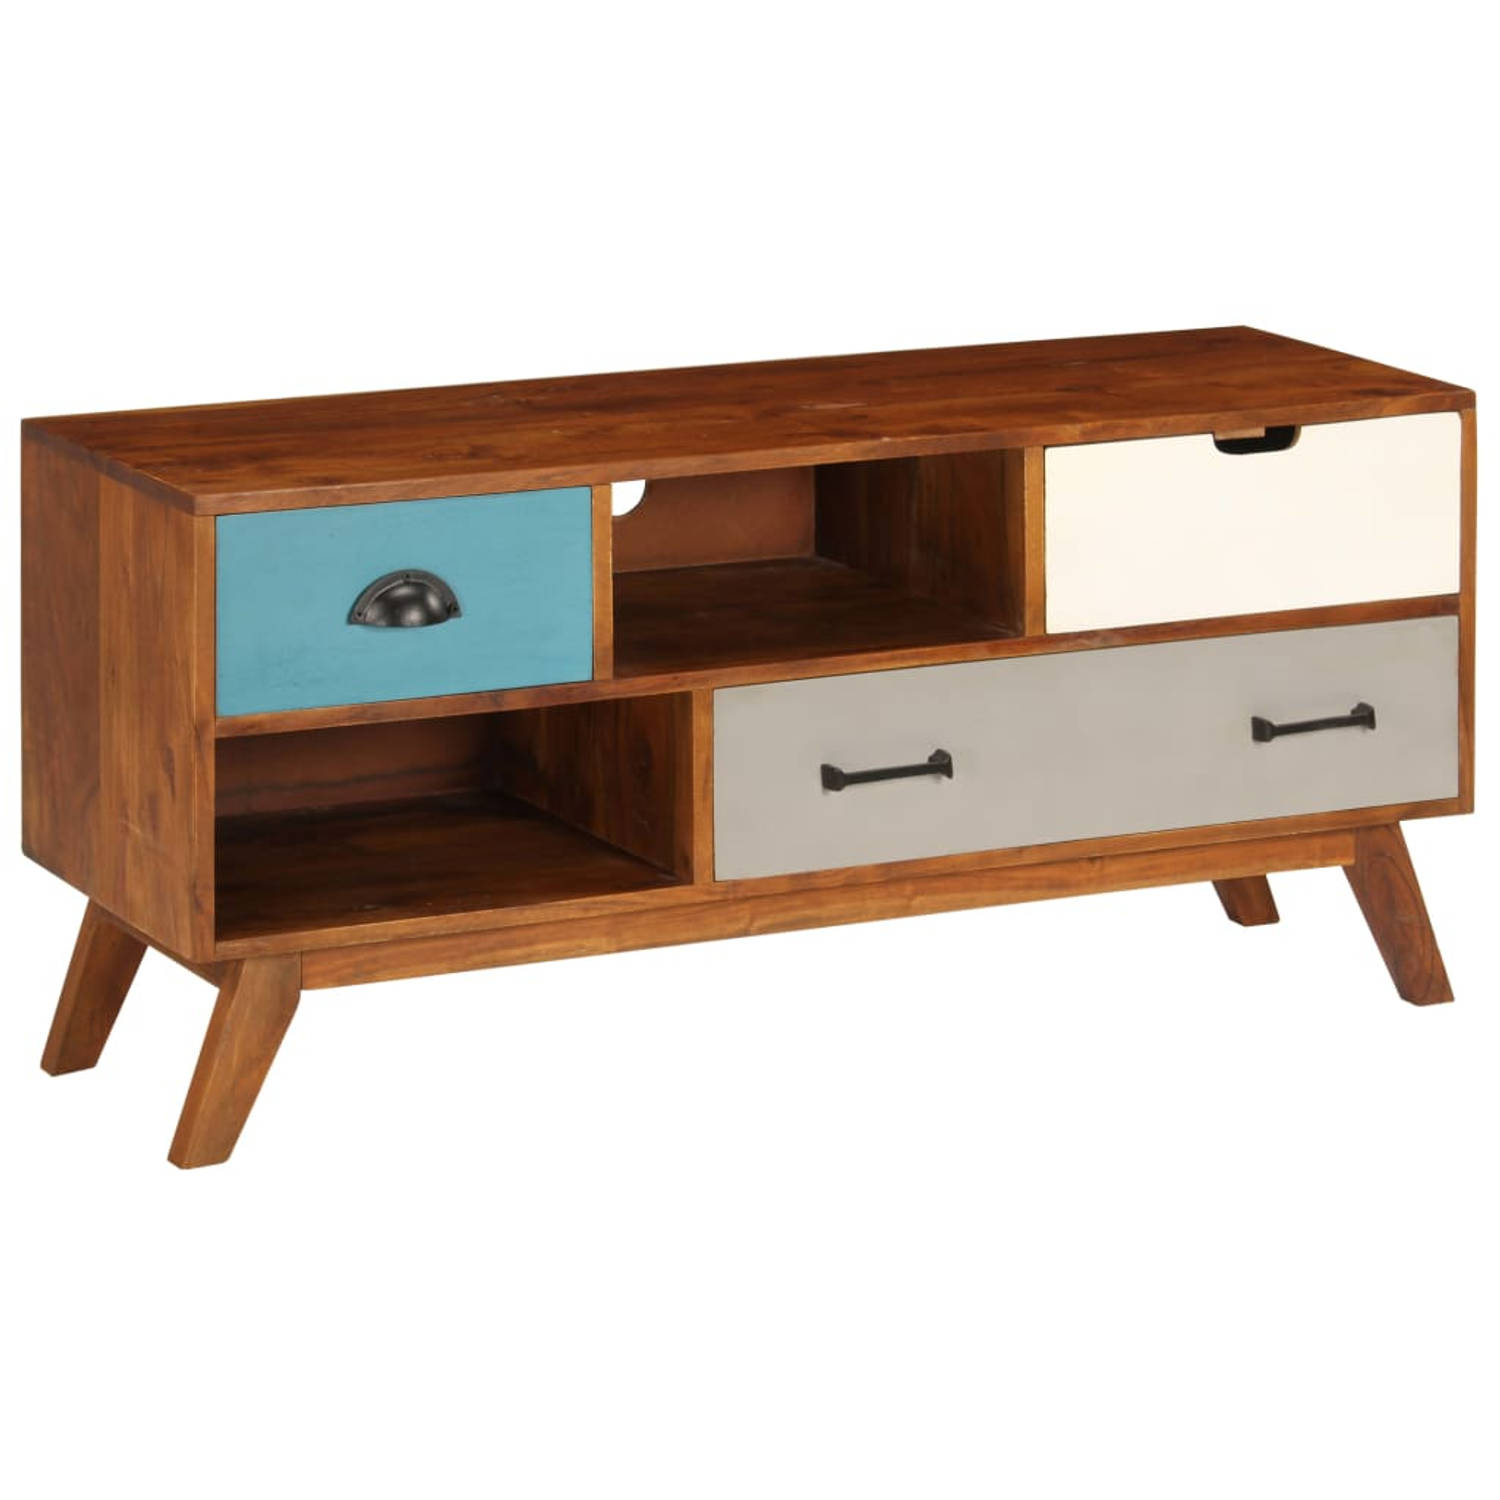 The Living Store Retro TV-kast Massief acaciahout 110 x 35 x 50 cm Donkere honingafwerking